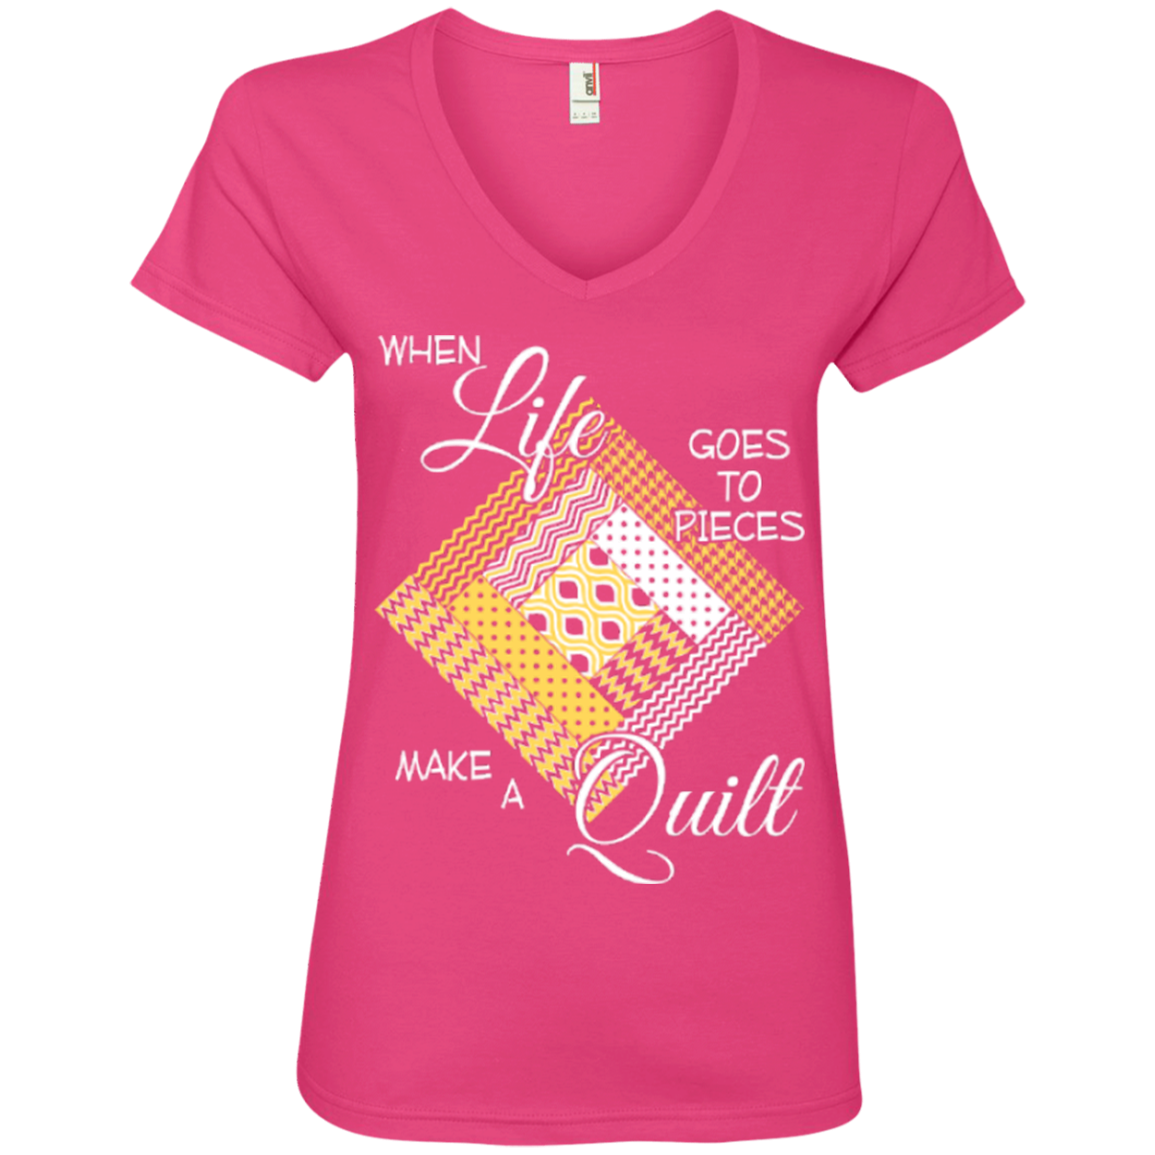 Make a Quilt (yellow) Ladies V-Neck Tee - Crafter4Life - 3